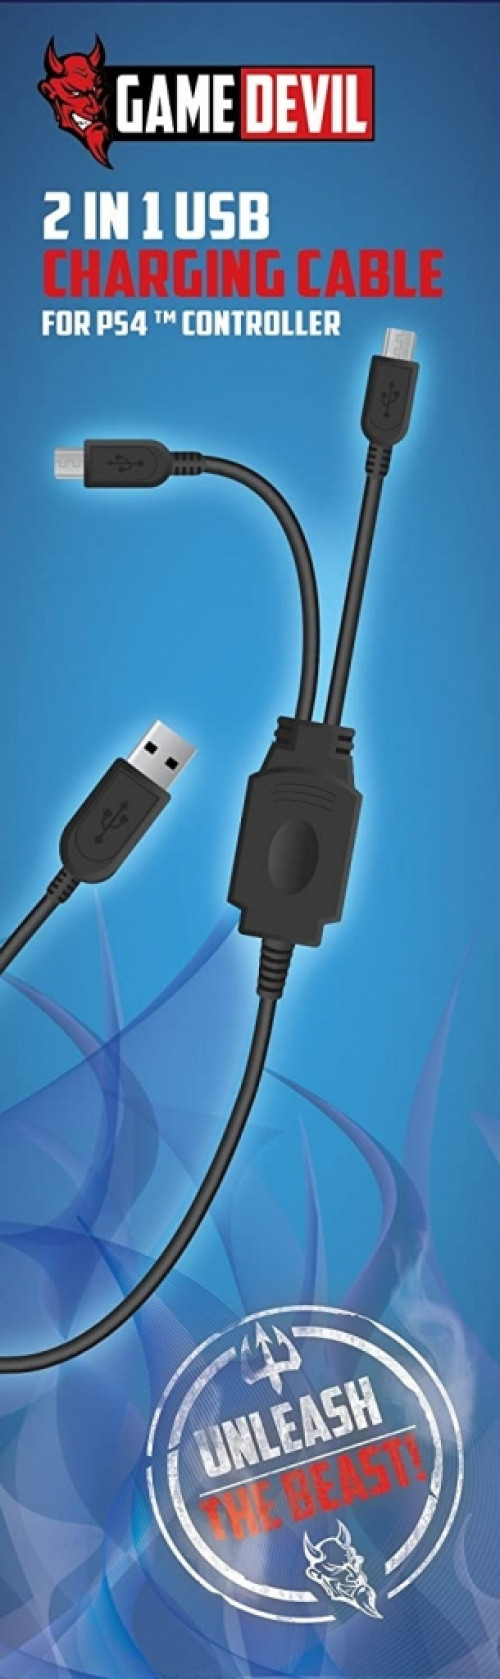 Game Devil 2 in 1 USB Charging Cable